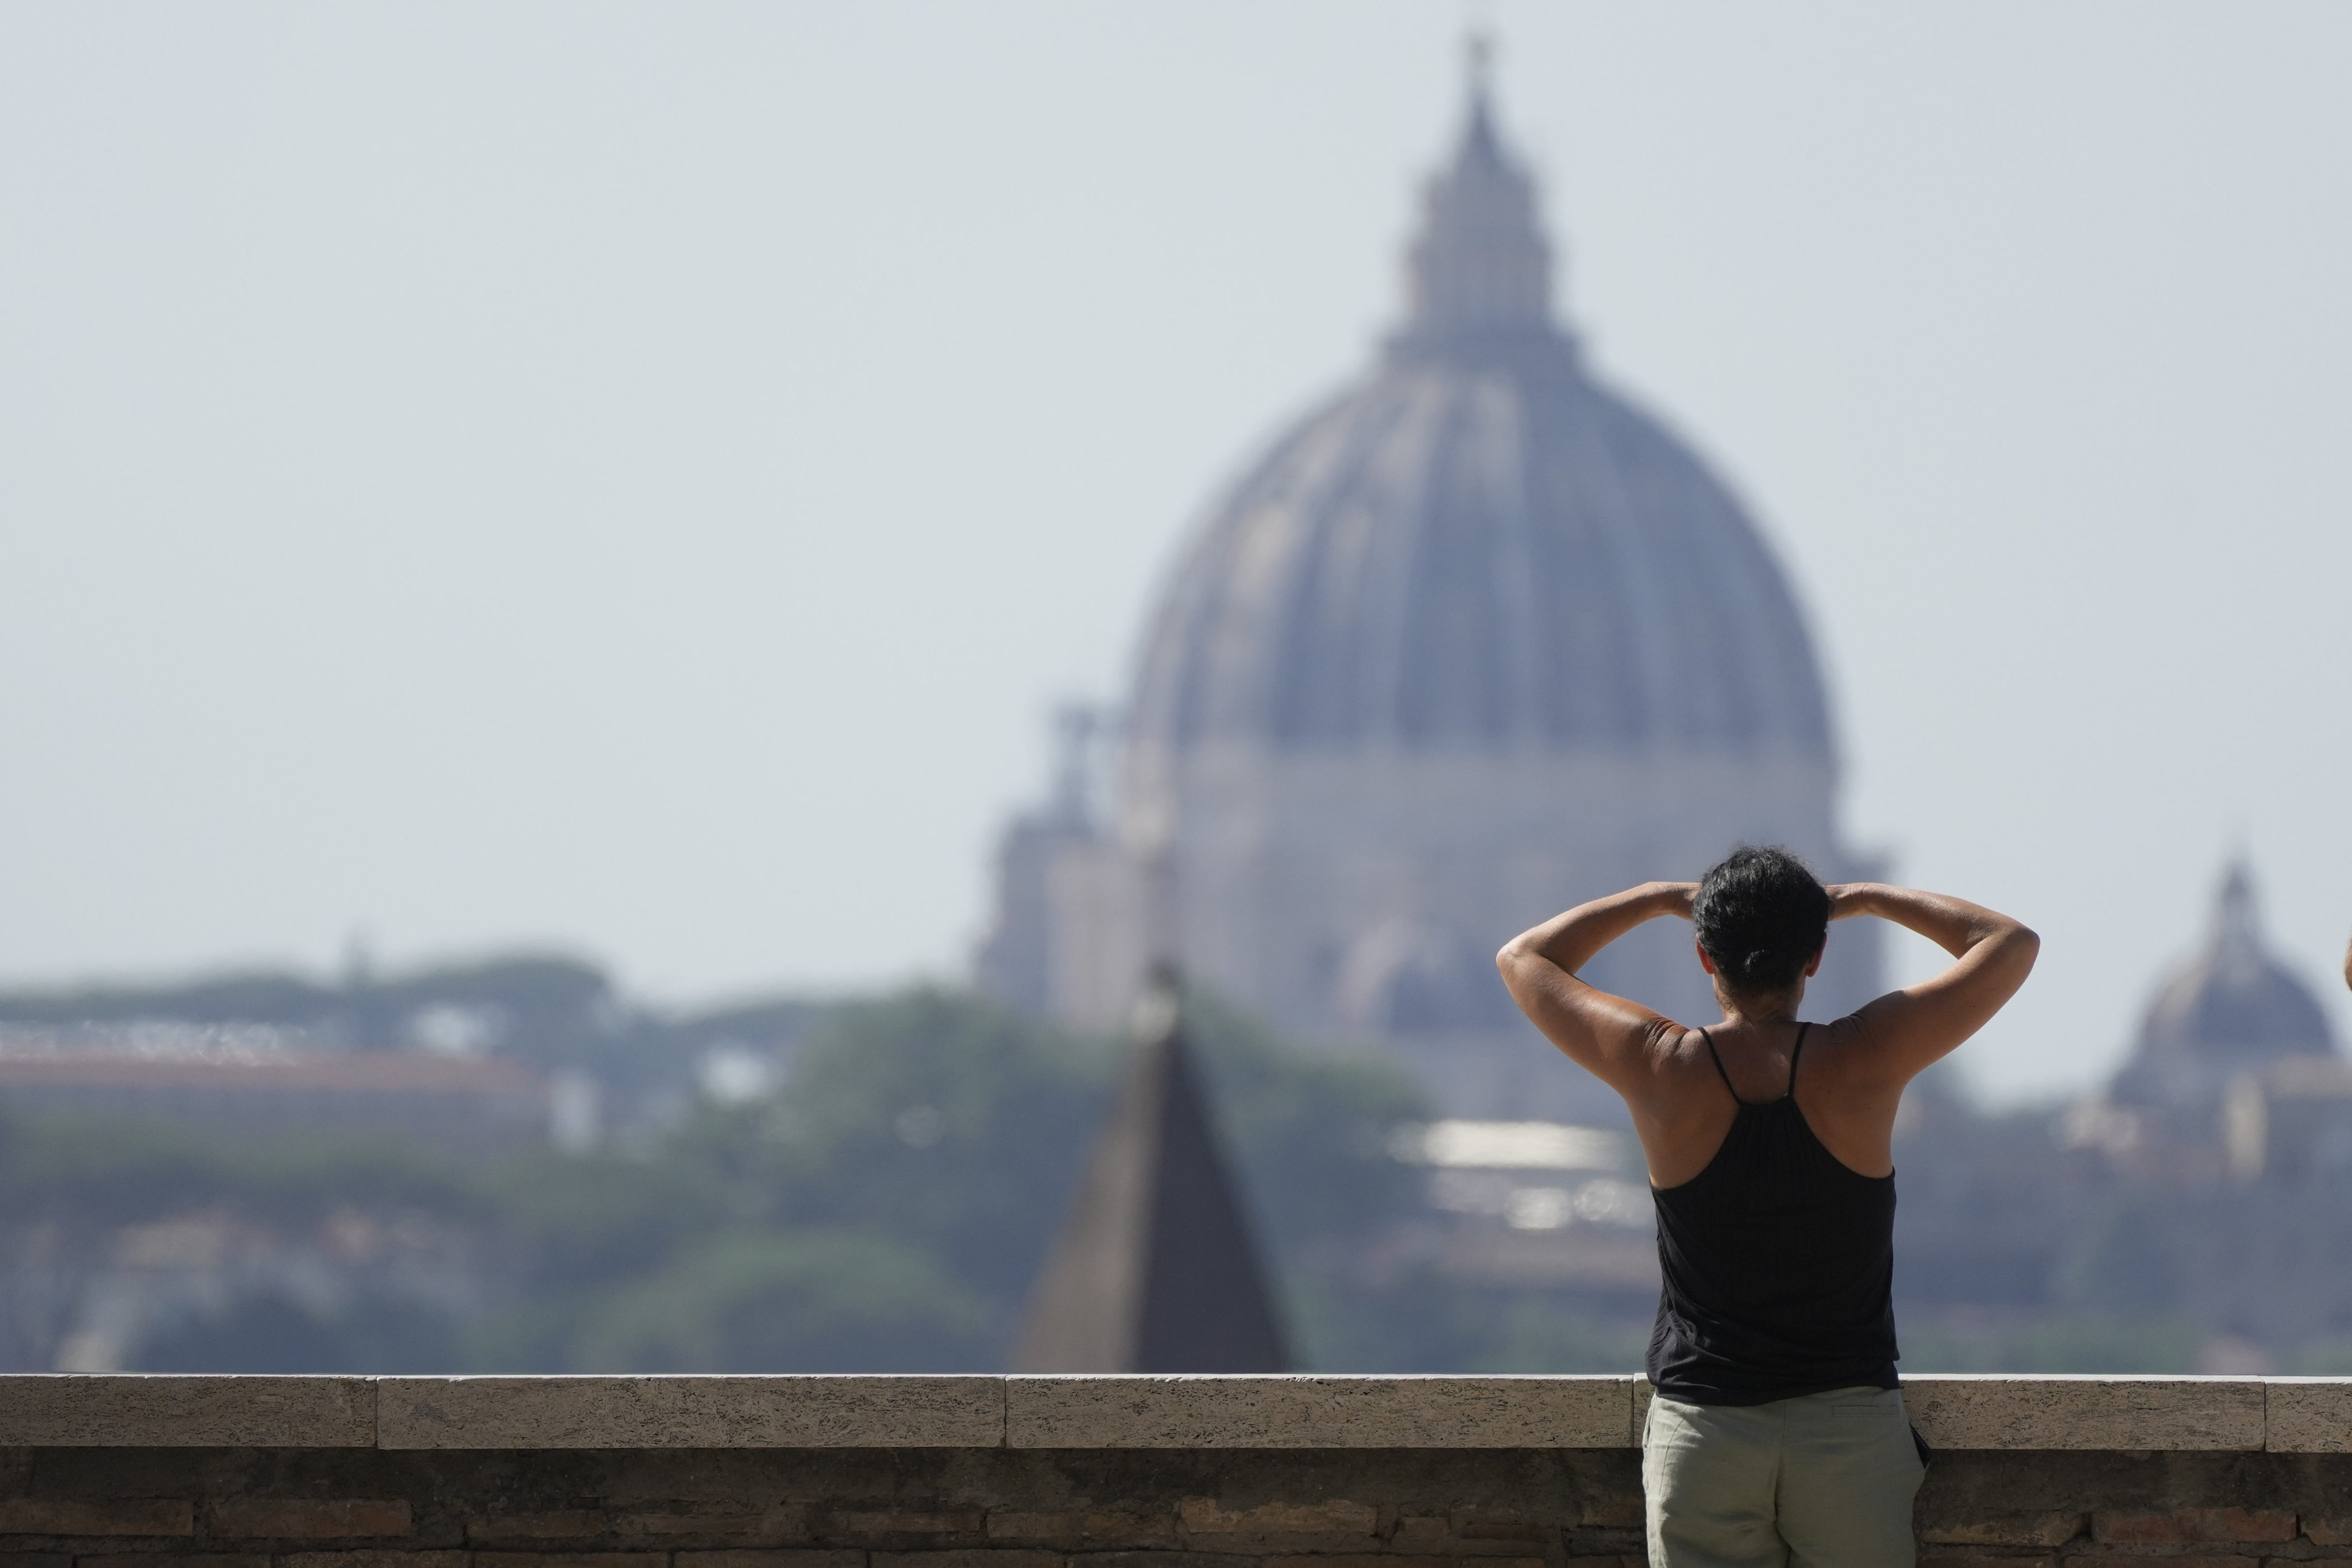 The St. Peter’s Dome in Rome, Italy. Photo: AP